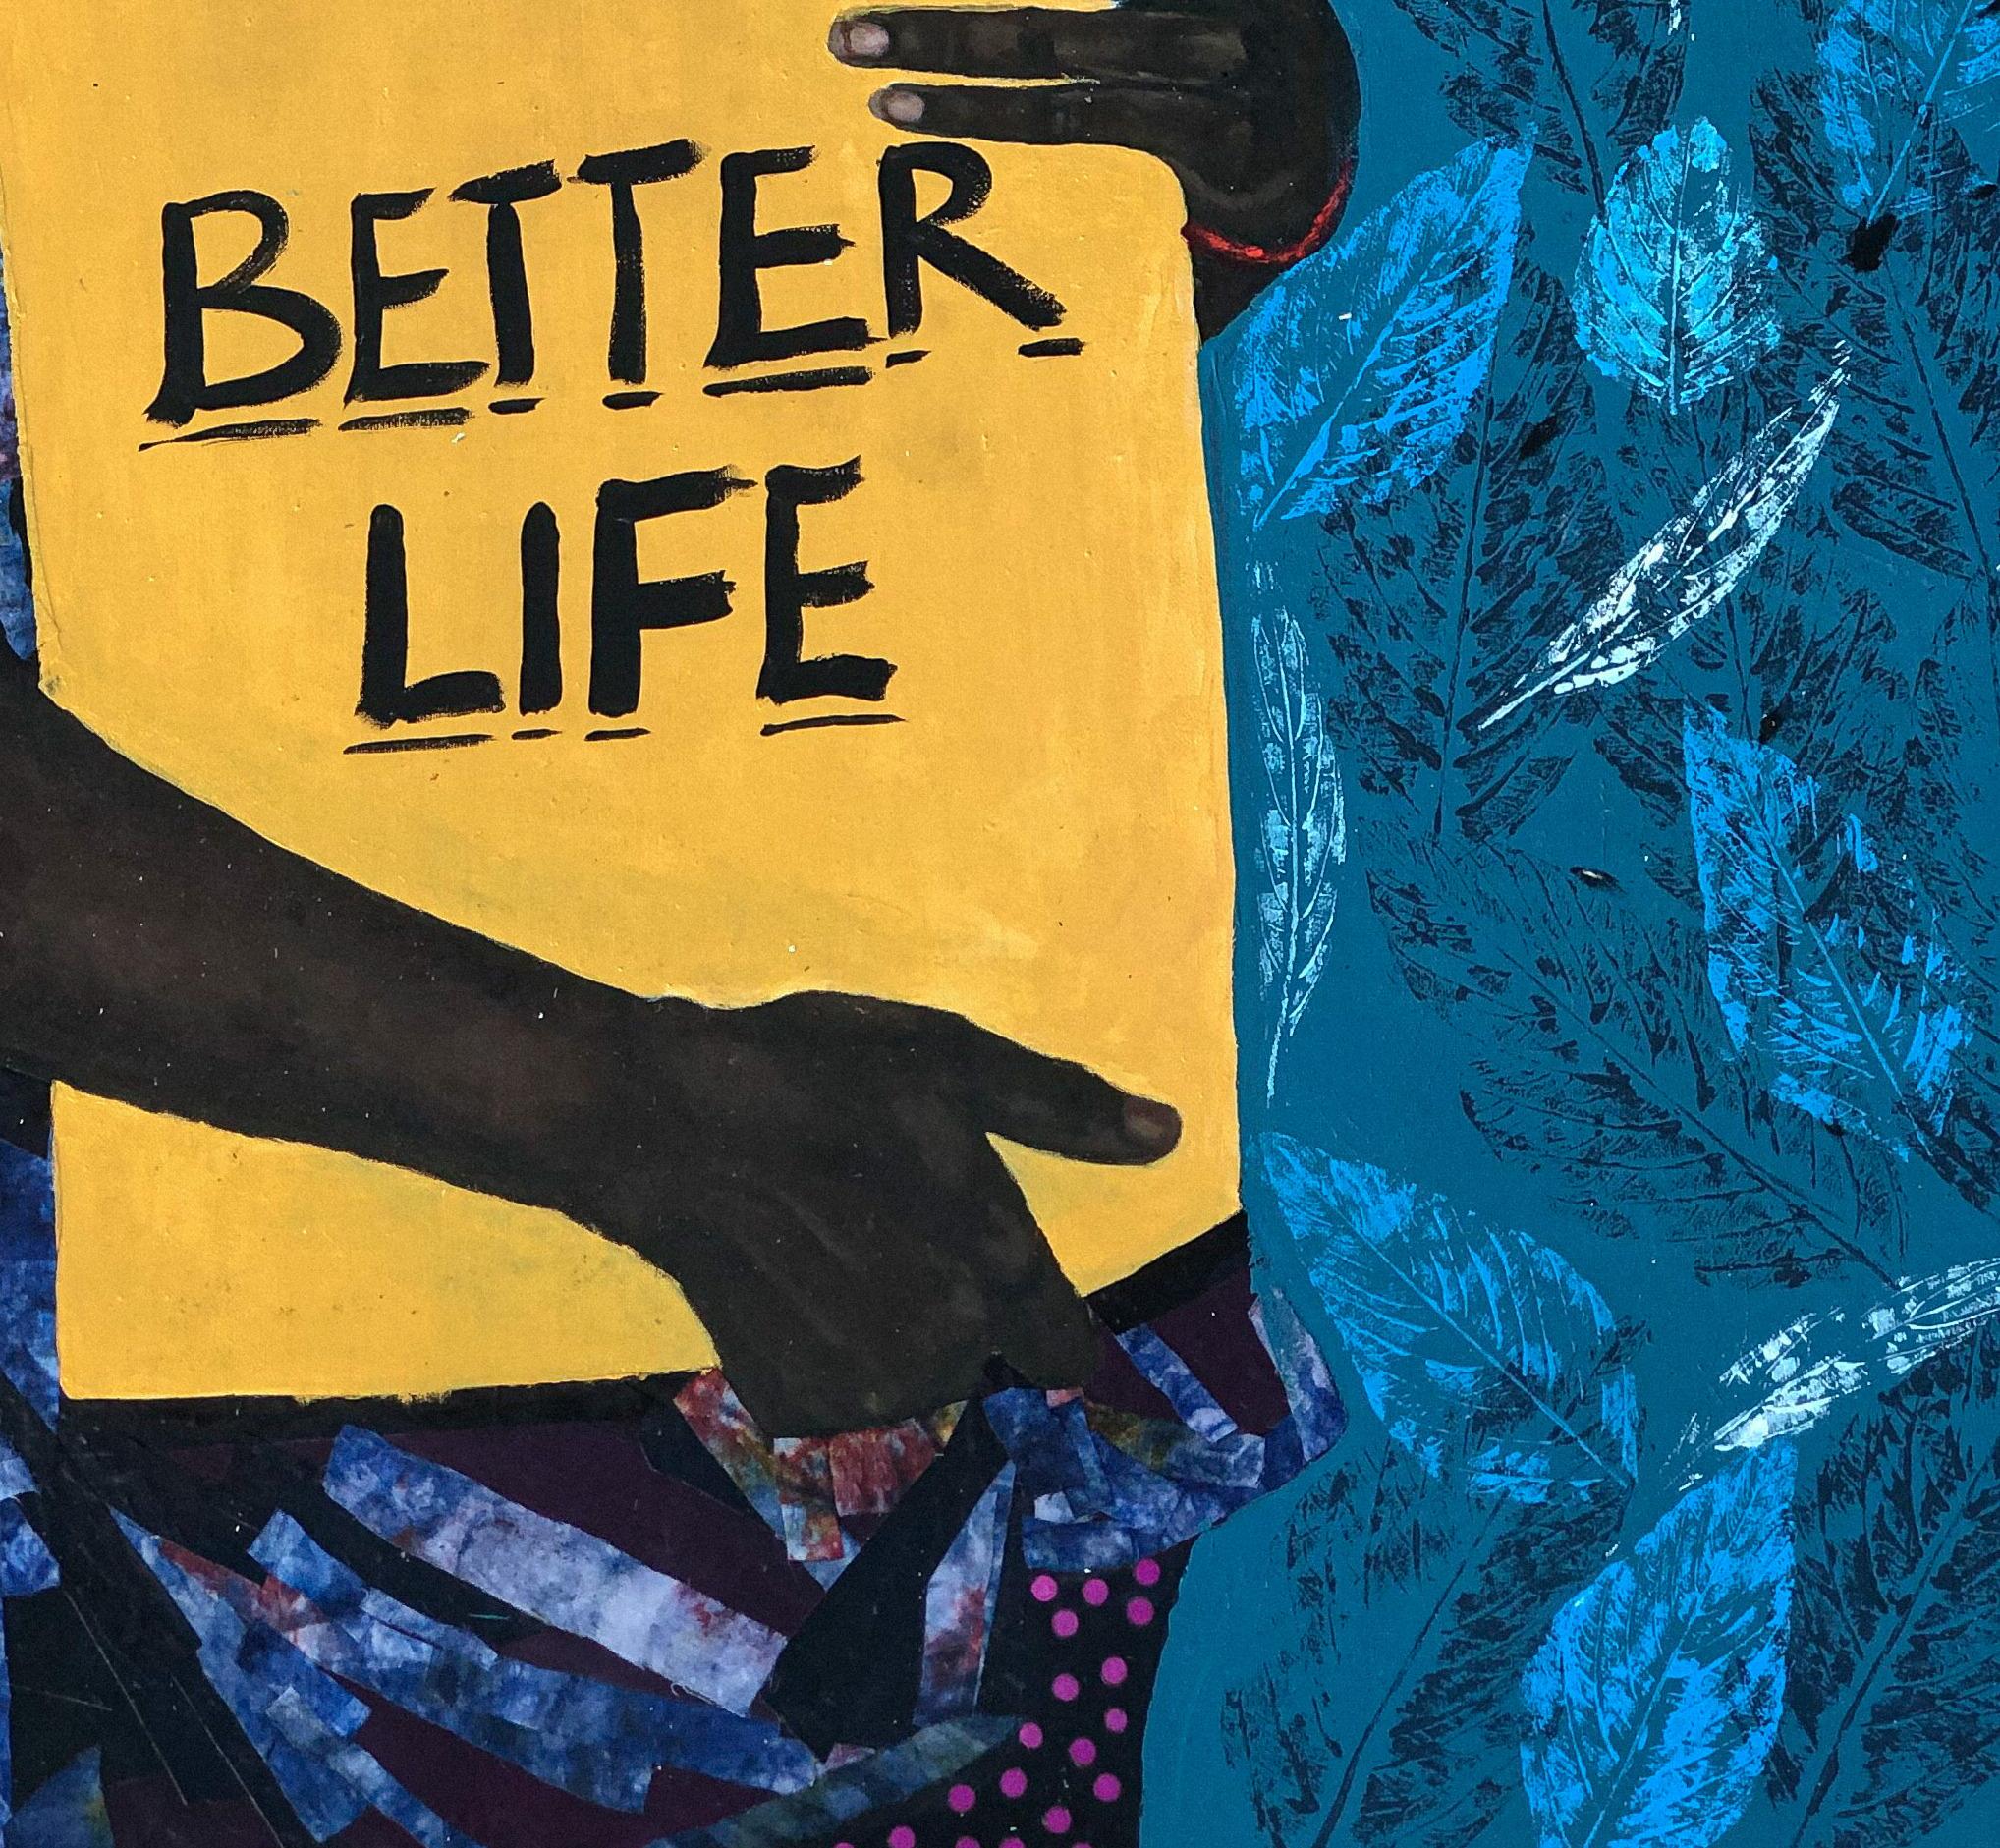 Better life is a work that shows a beautiful black woman holding a board that has an inscription of 